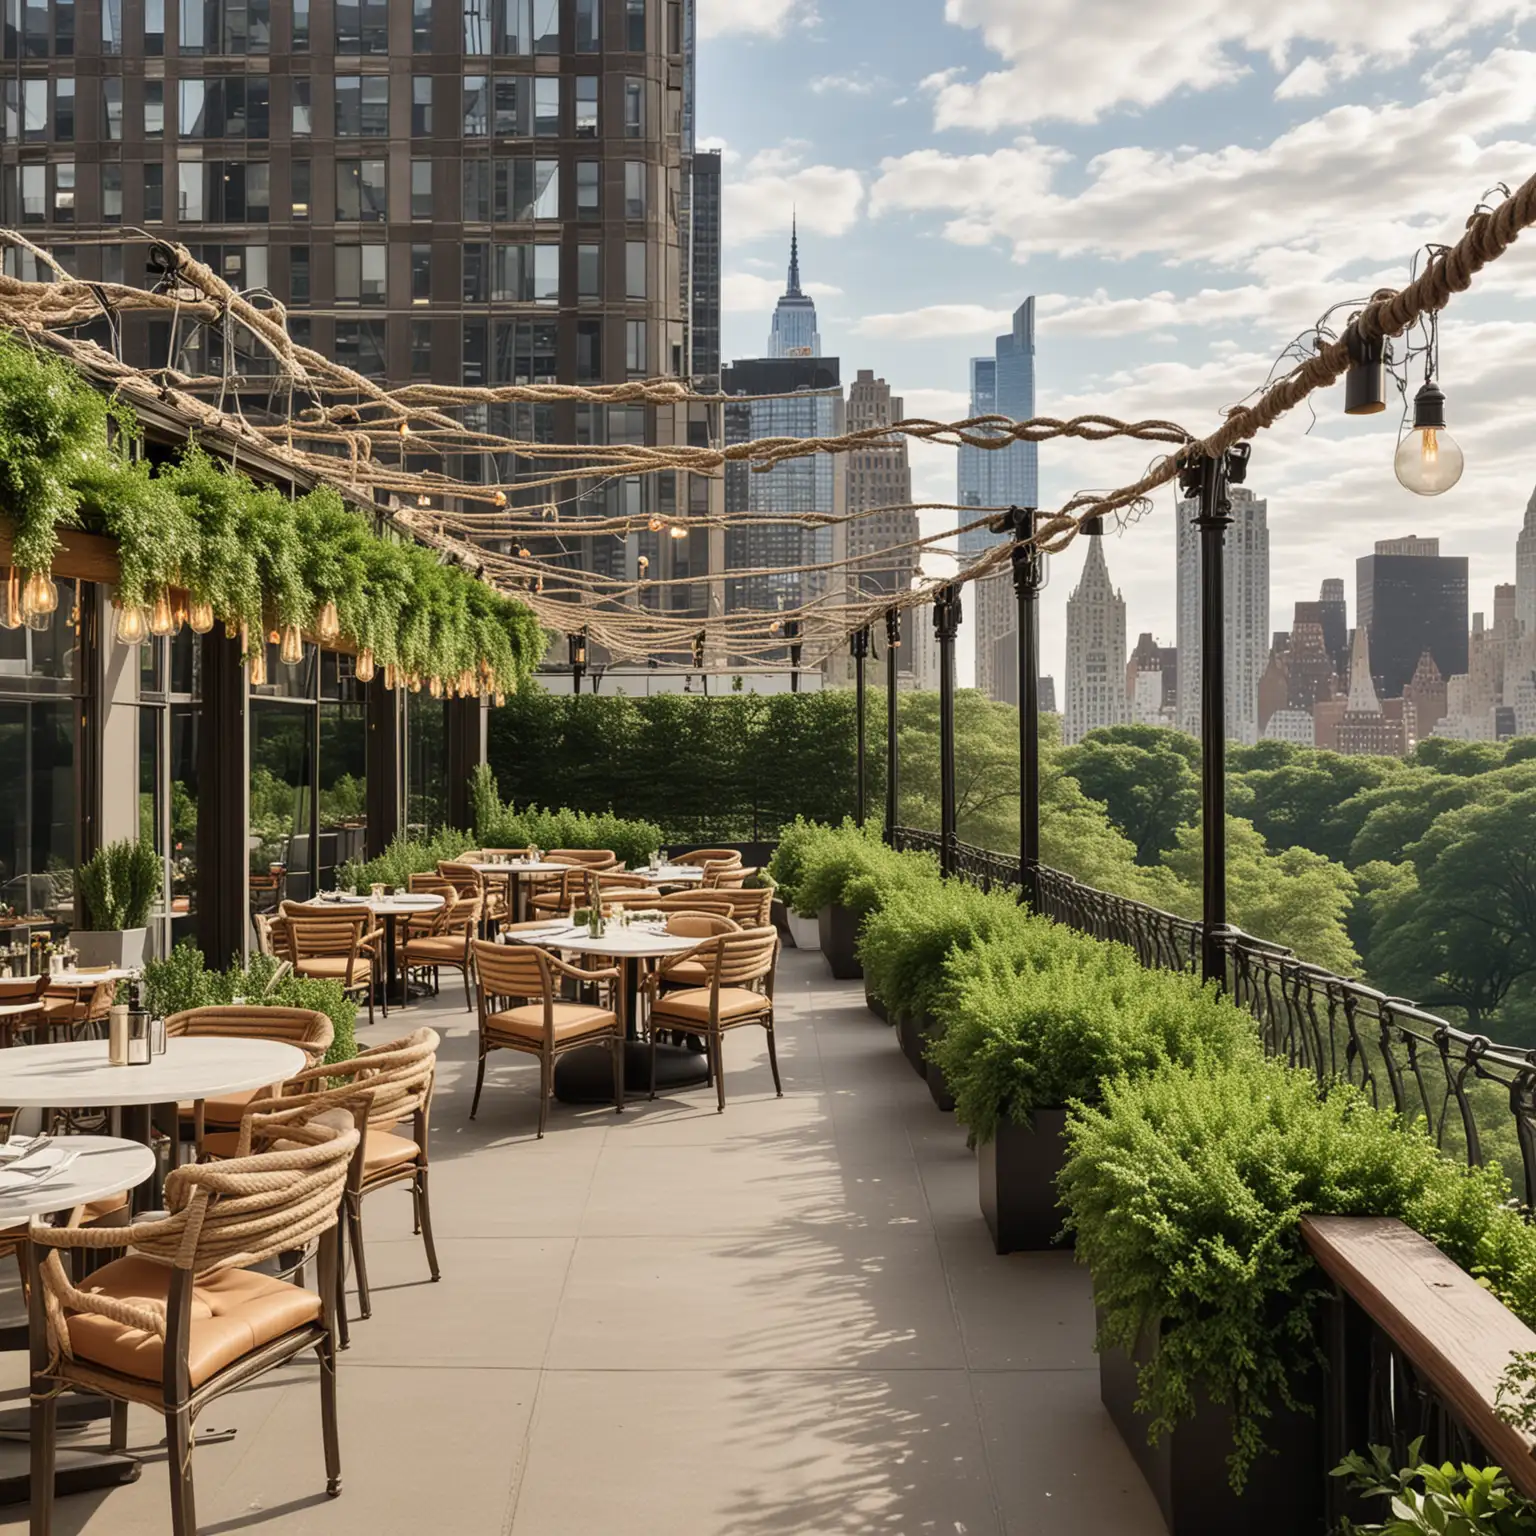 Elegant Rooftop Restaurant Overlooking Central Park with Lounge Furniture and Secluded Areas